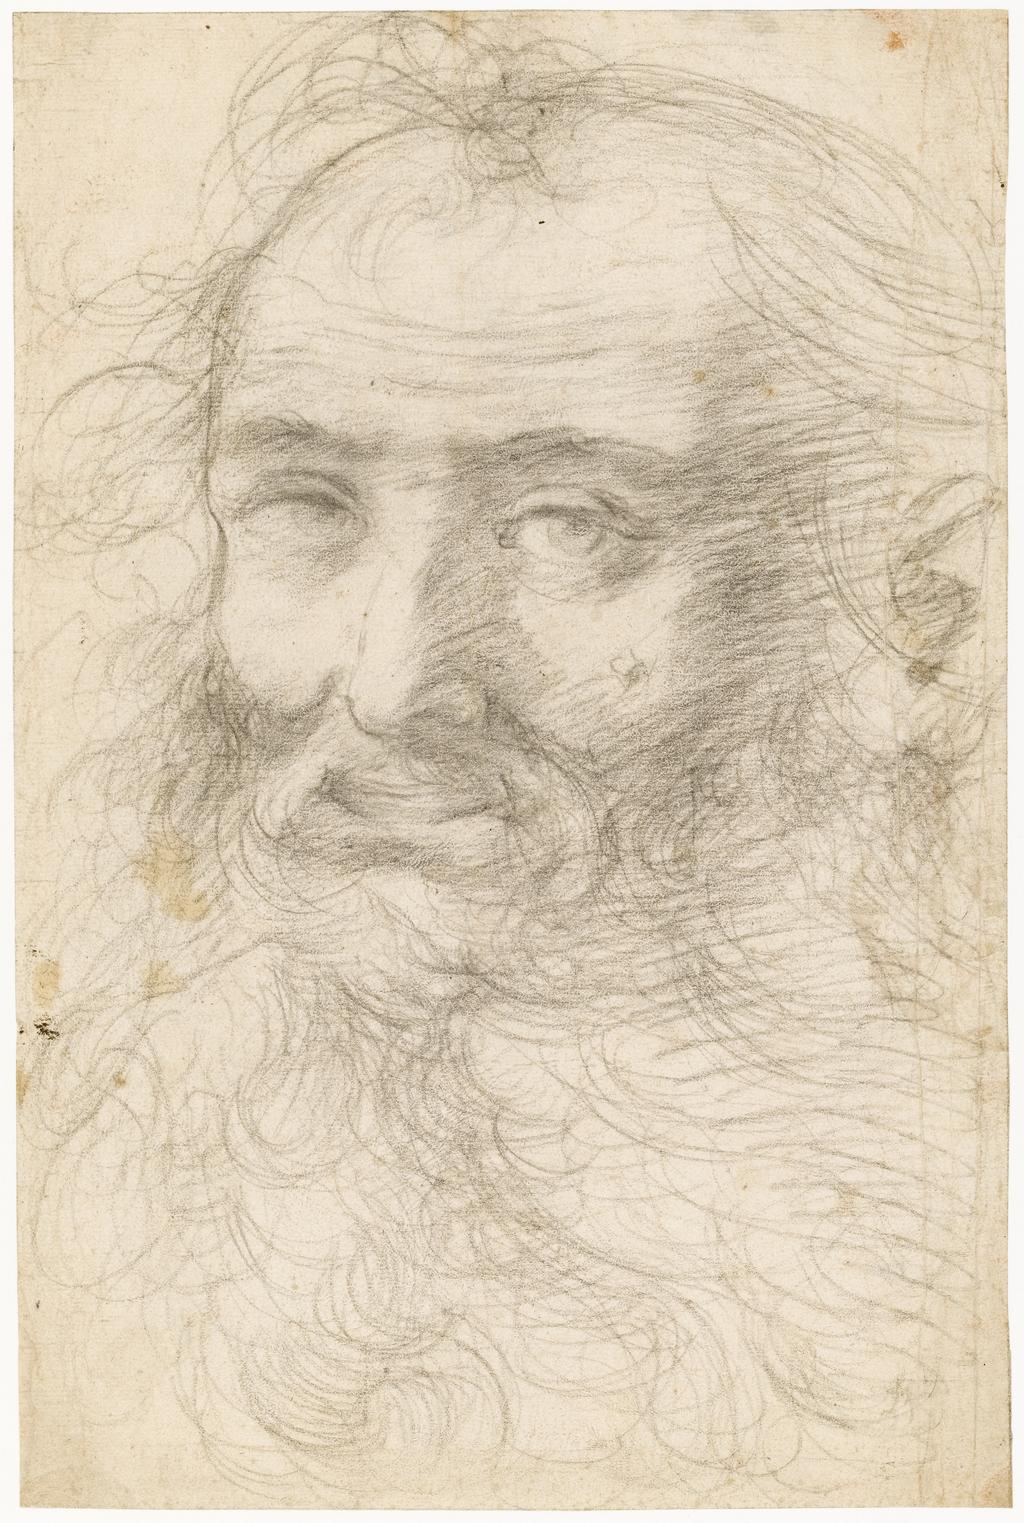 An image of Title/s: Head of a bearded man 
Maker/s: Procaccini, Camillo attributed to (draughtsman) [ULAN info: Italian artist, 1551(?)-1629]
Technique Description: black chalk on paper 
Dimensions: height: 375 mm, width: 247 mm

 

 
